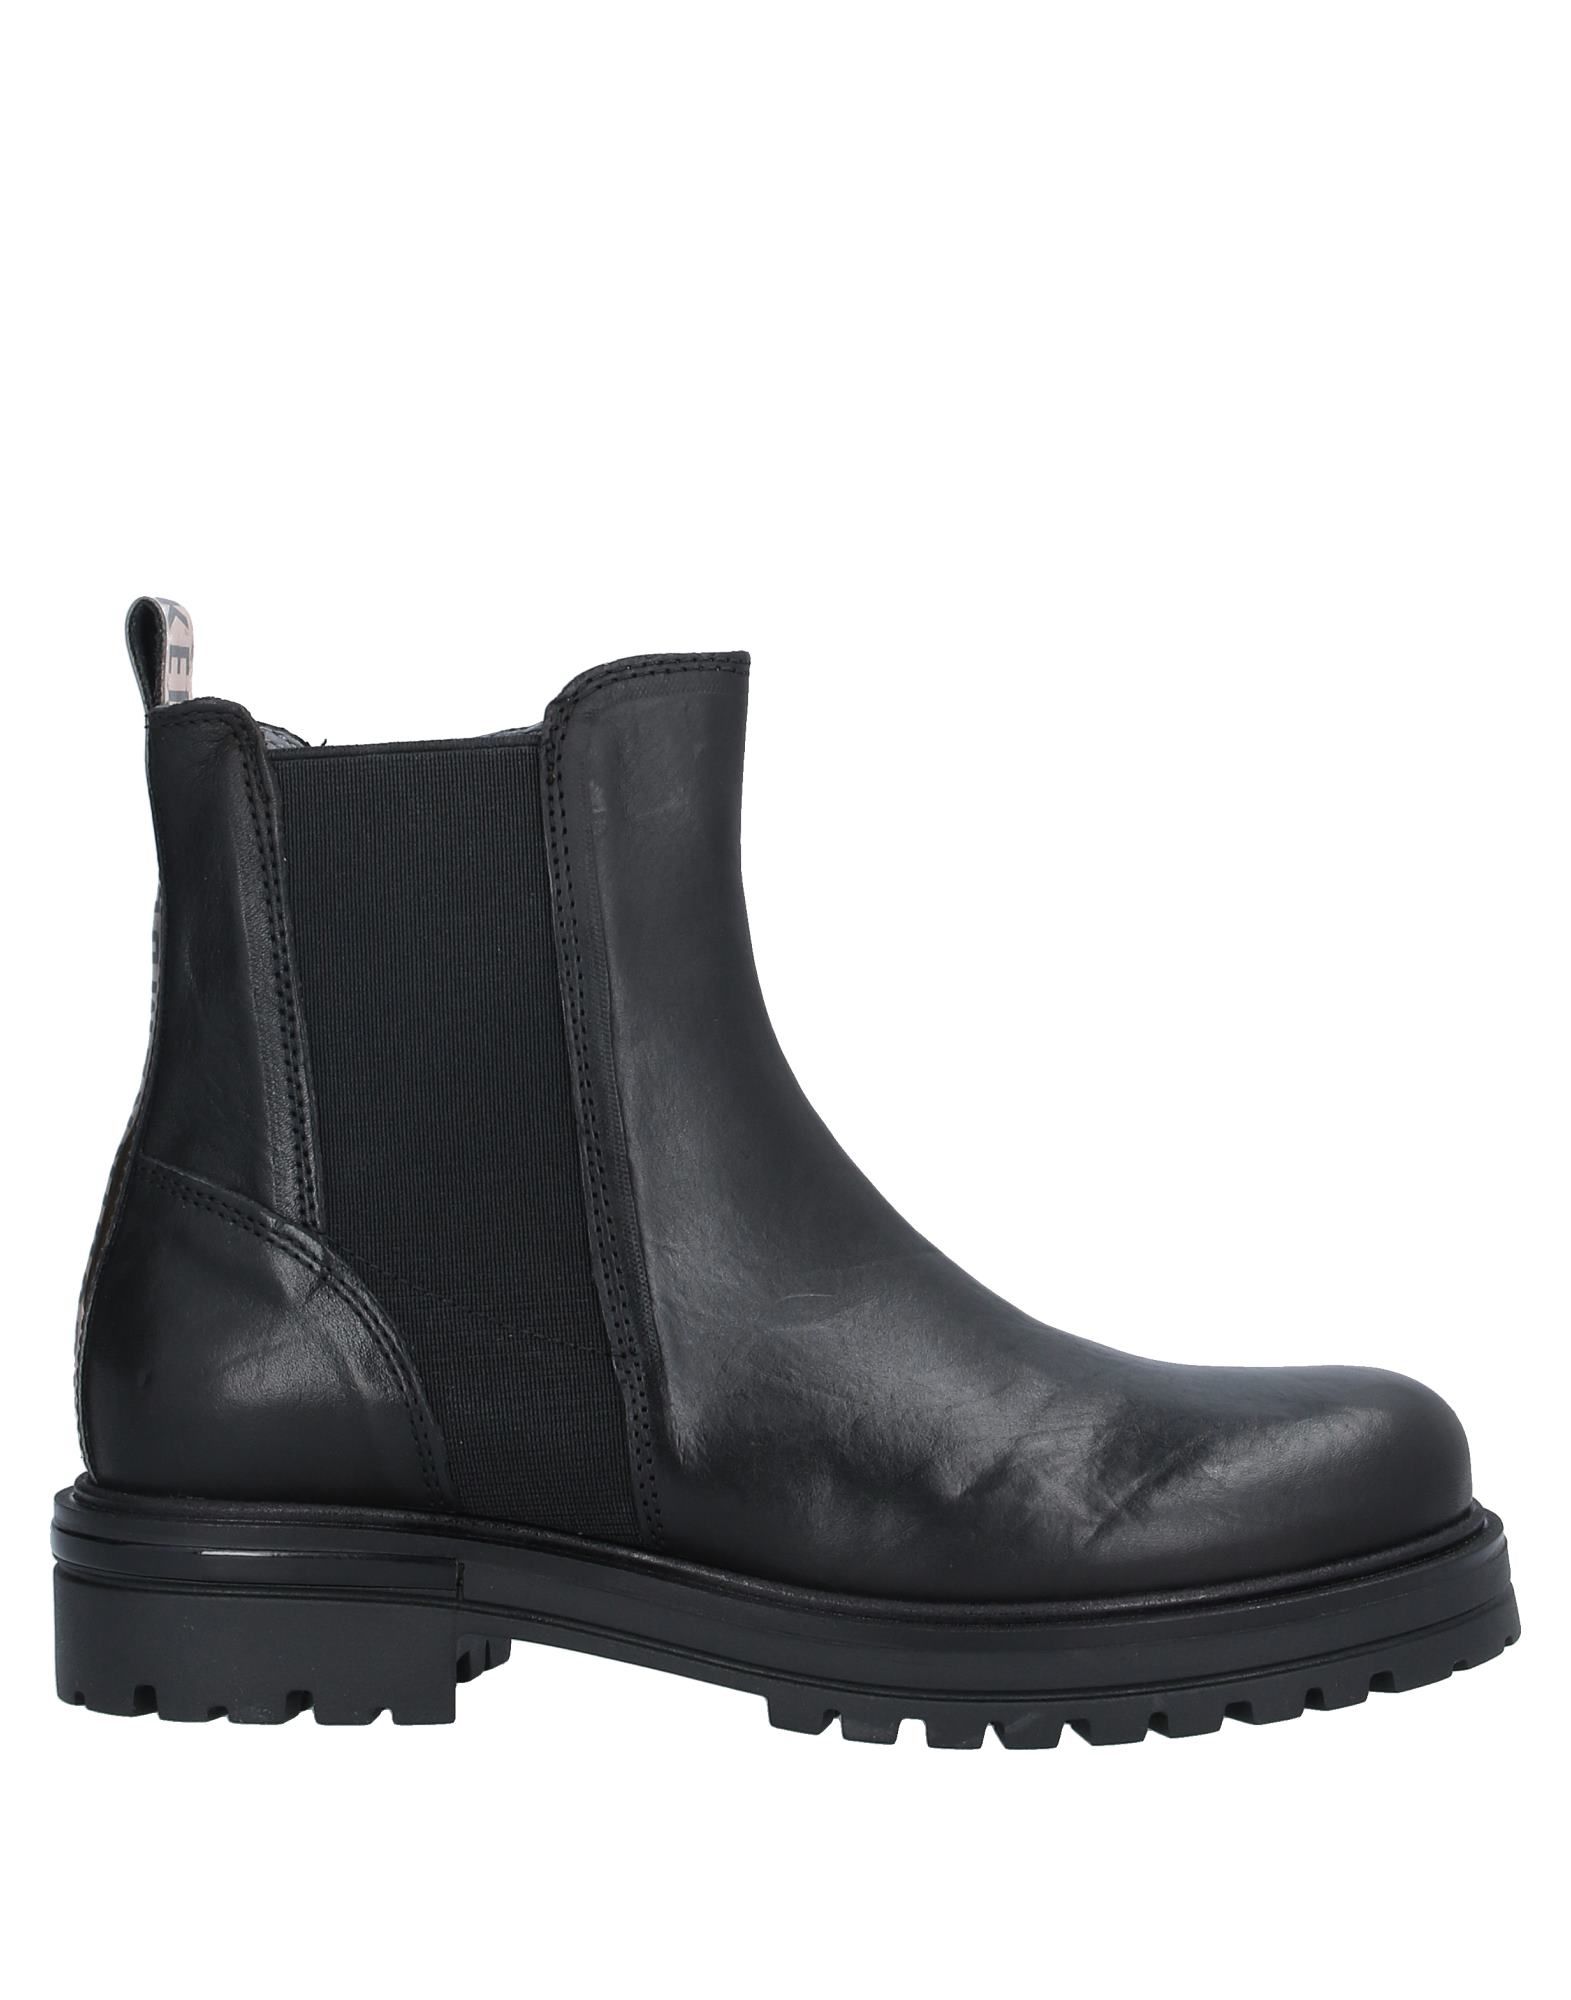 BIKKEMBERGS Ankle boots - Item 11934244